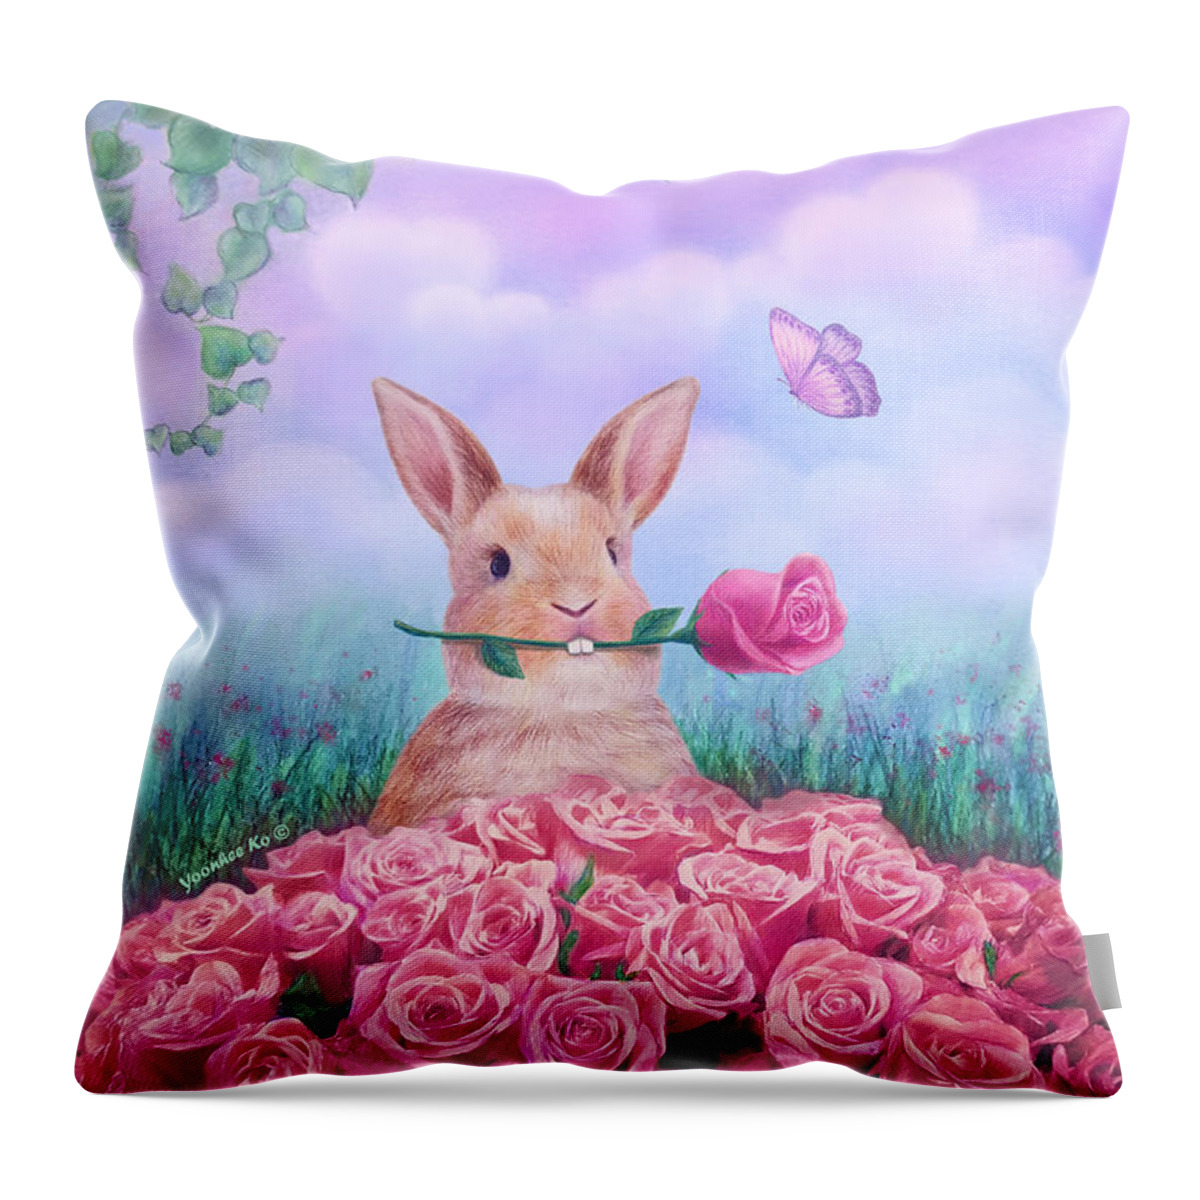 Rose Throw Pillow featuring the painting For You by Yoonhee Ko